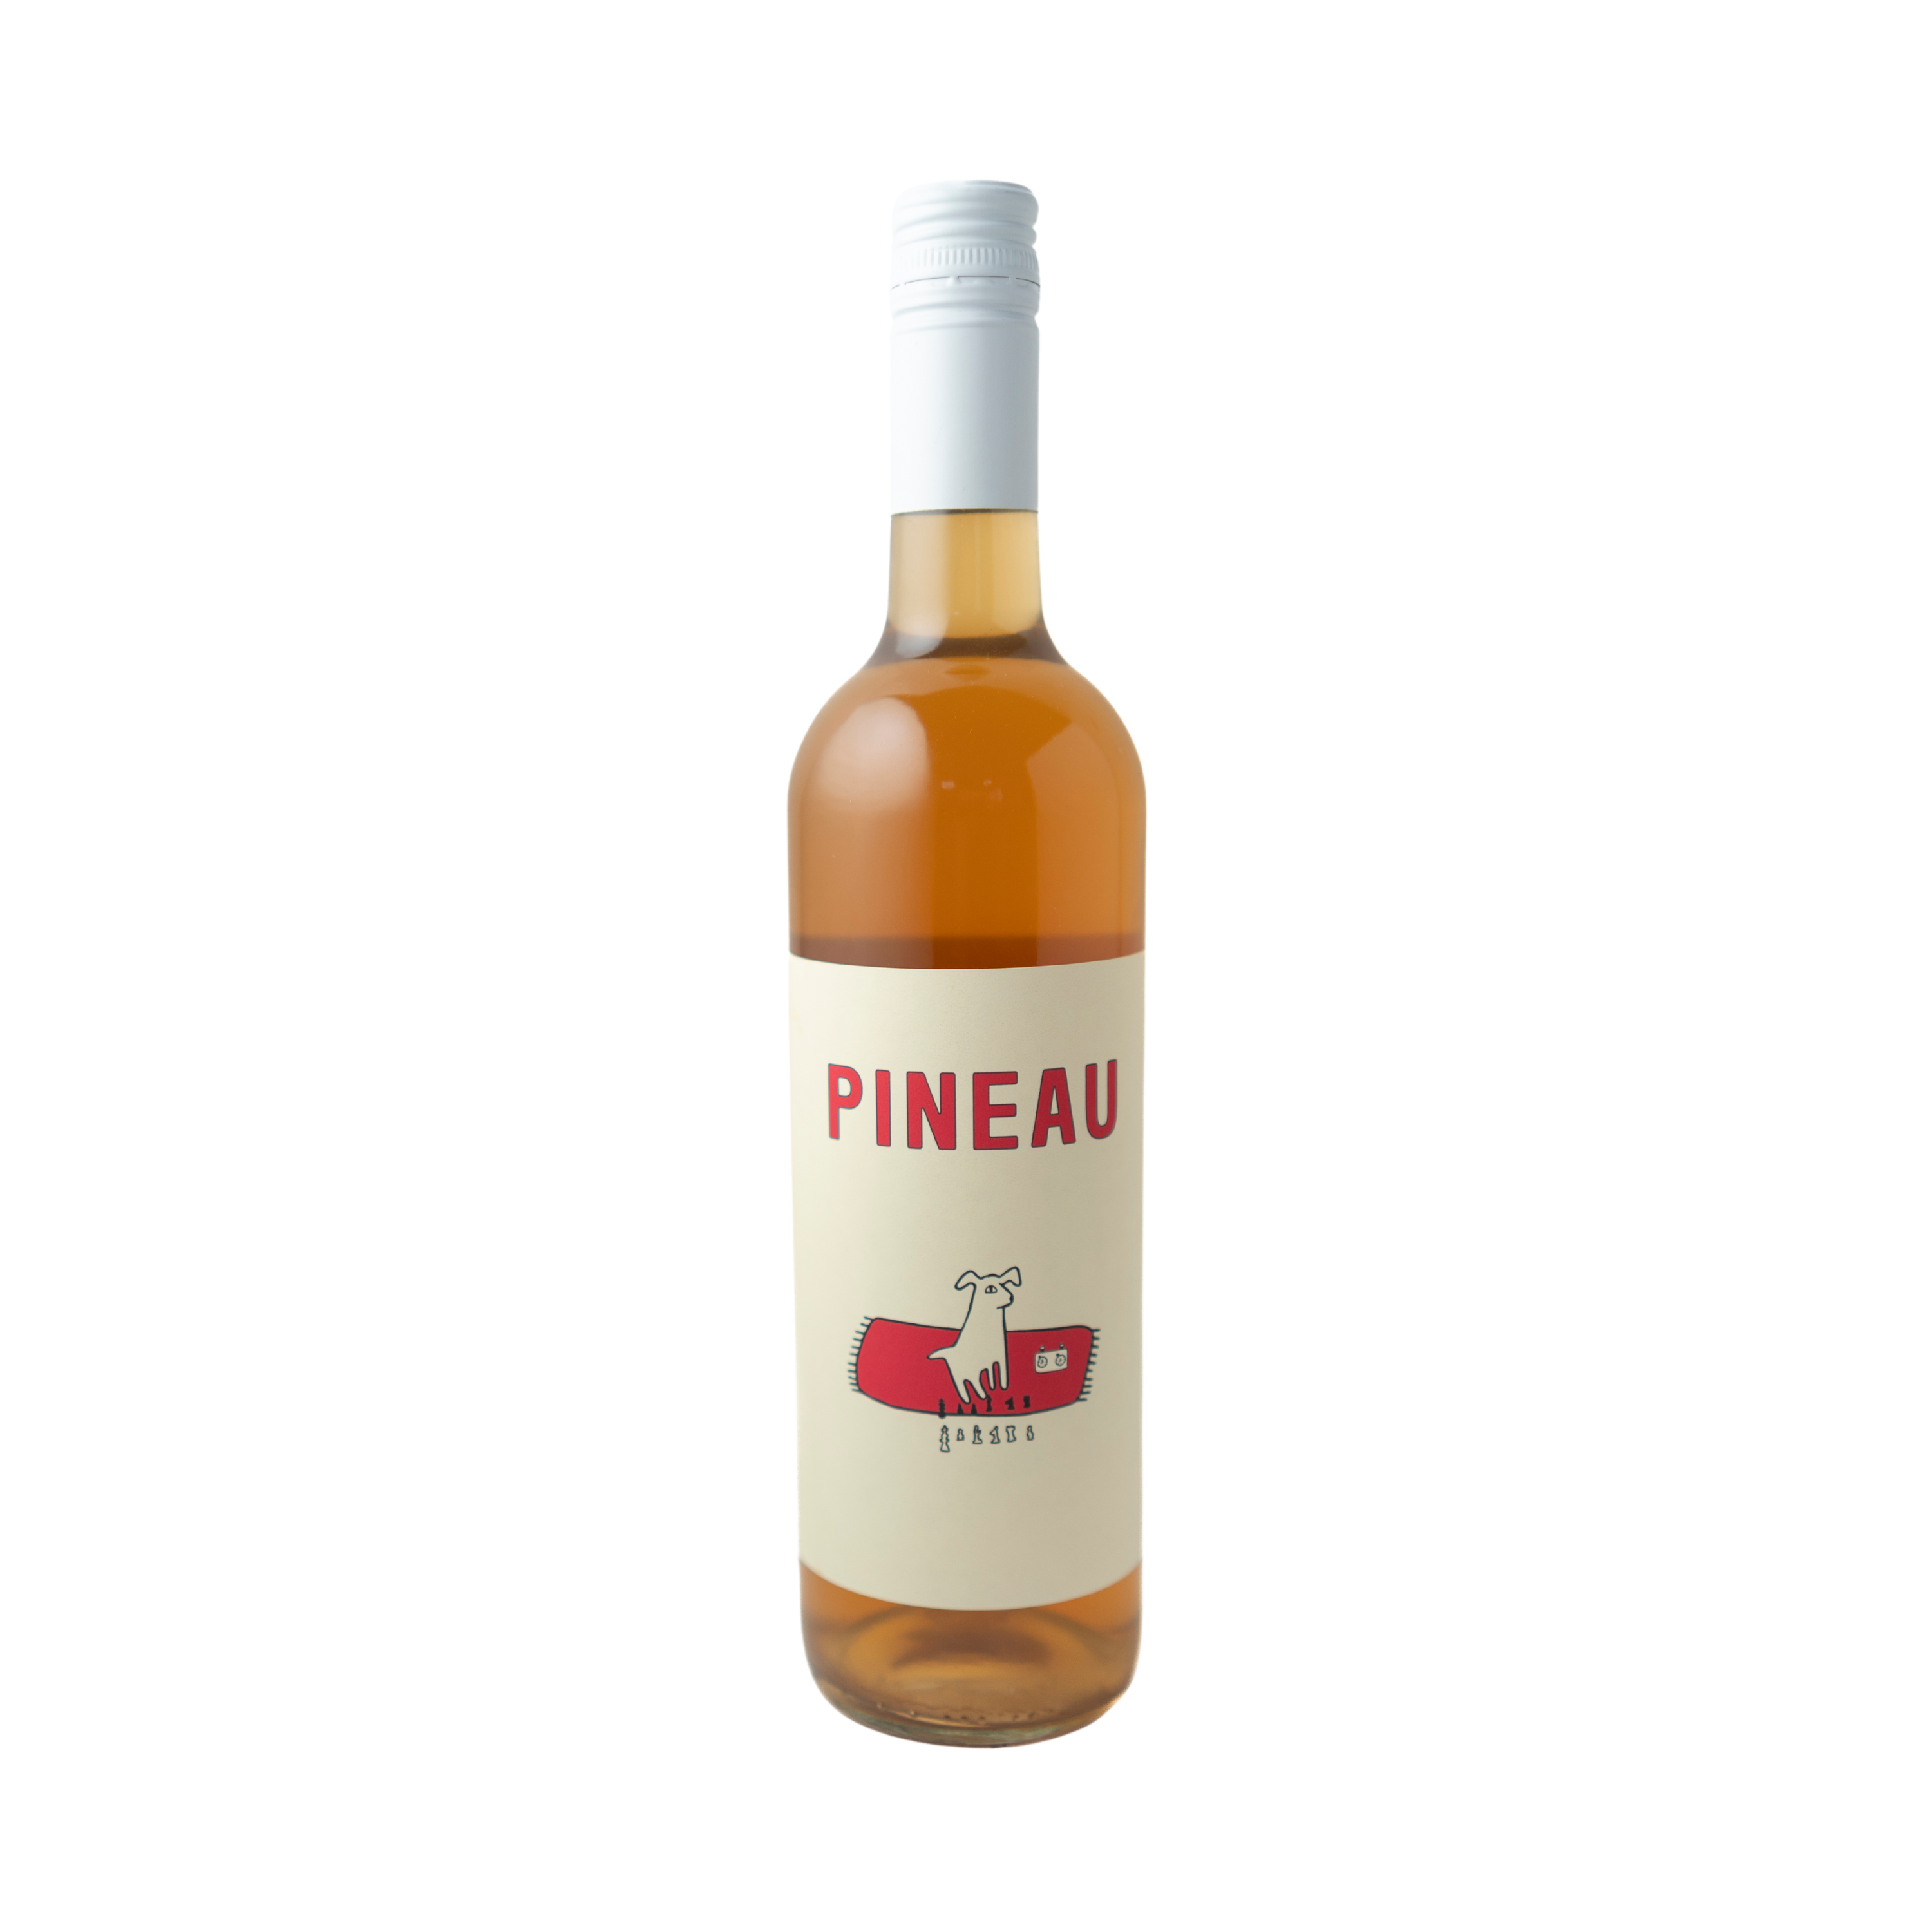 Images of Pineau des charentes d'ontario from Traynor Family Vineyard a winery in Prince Edward County